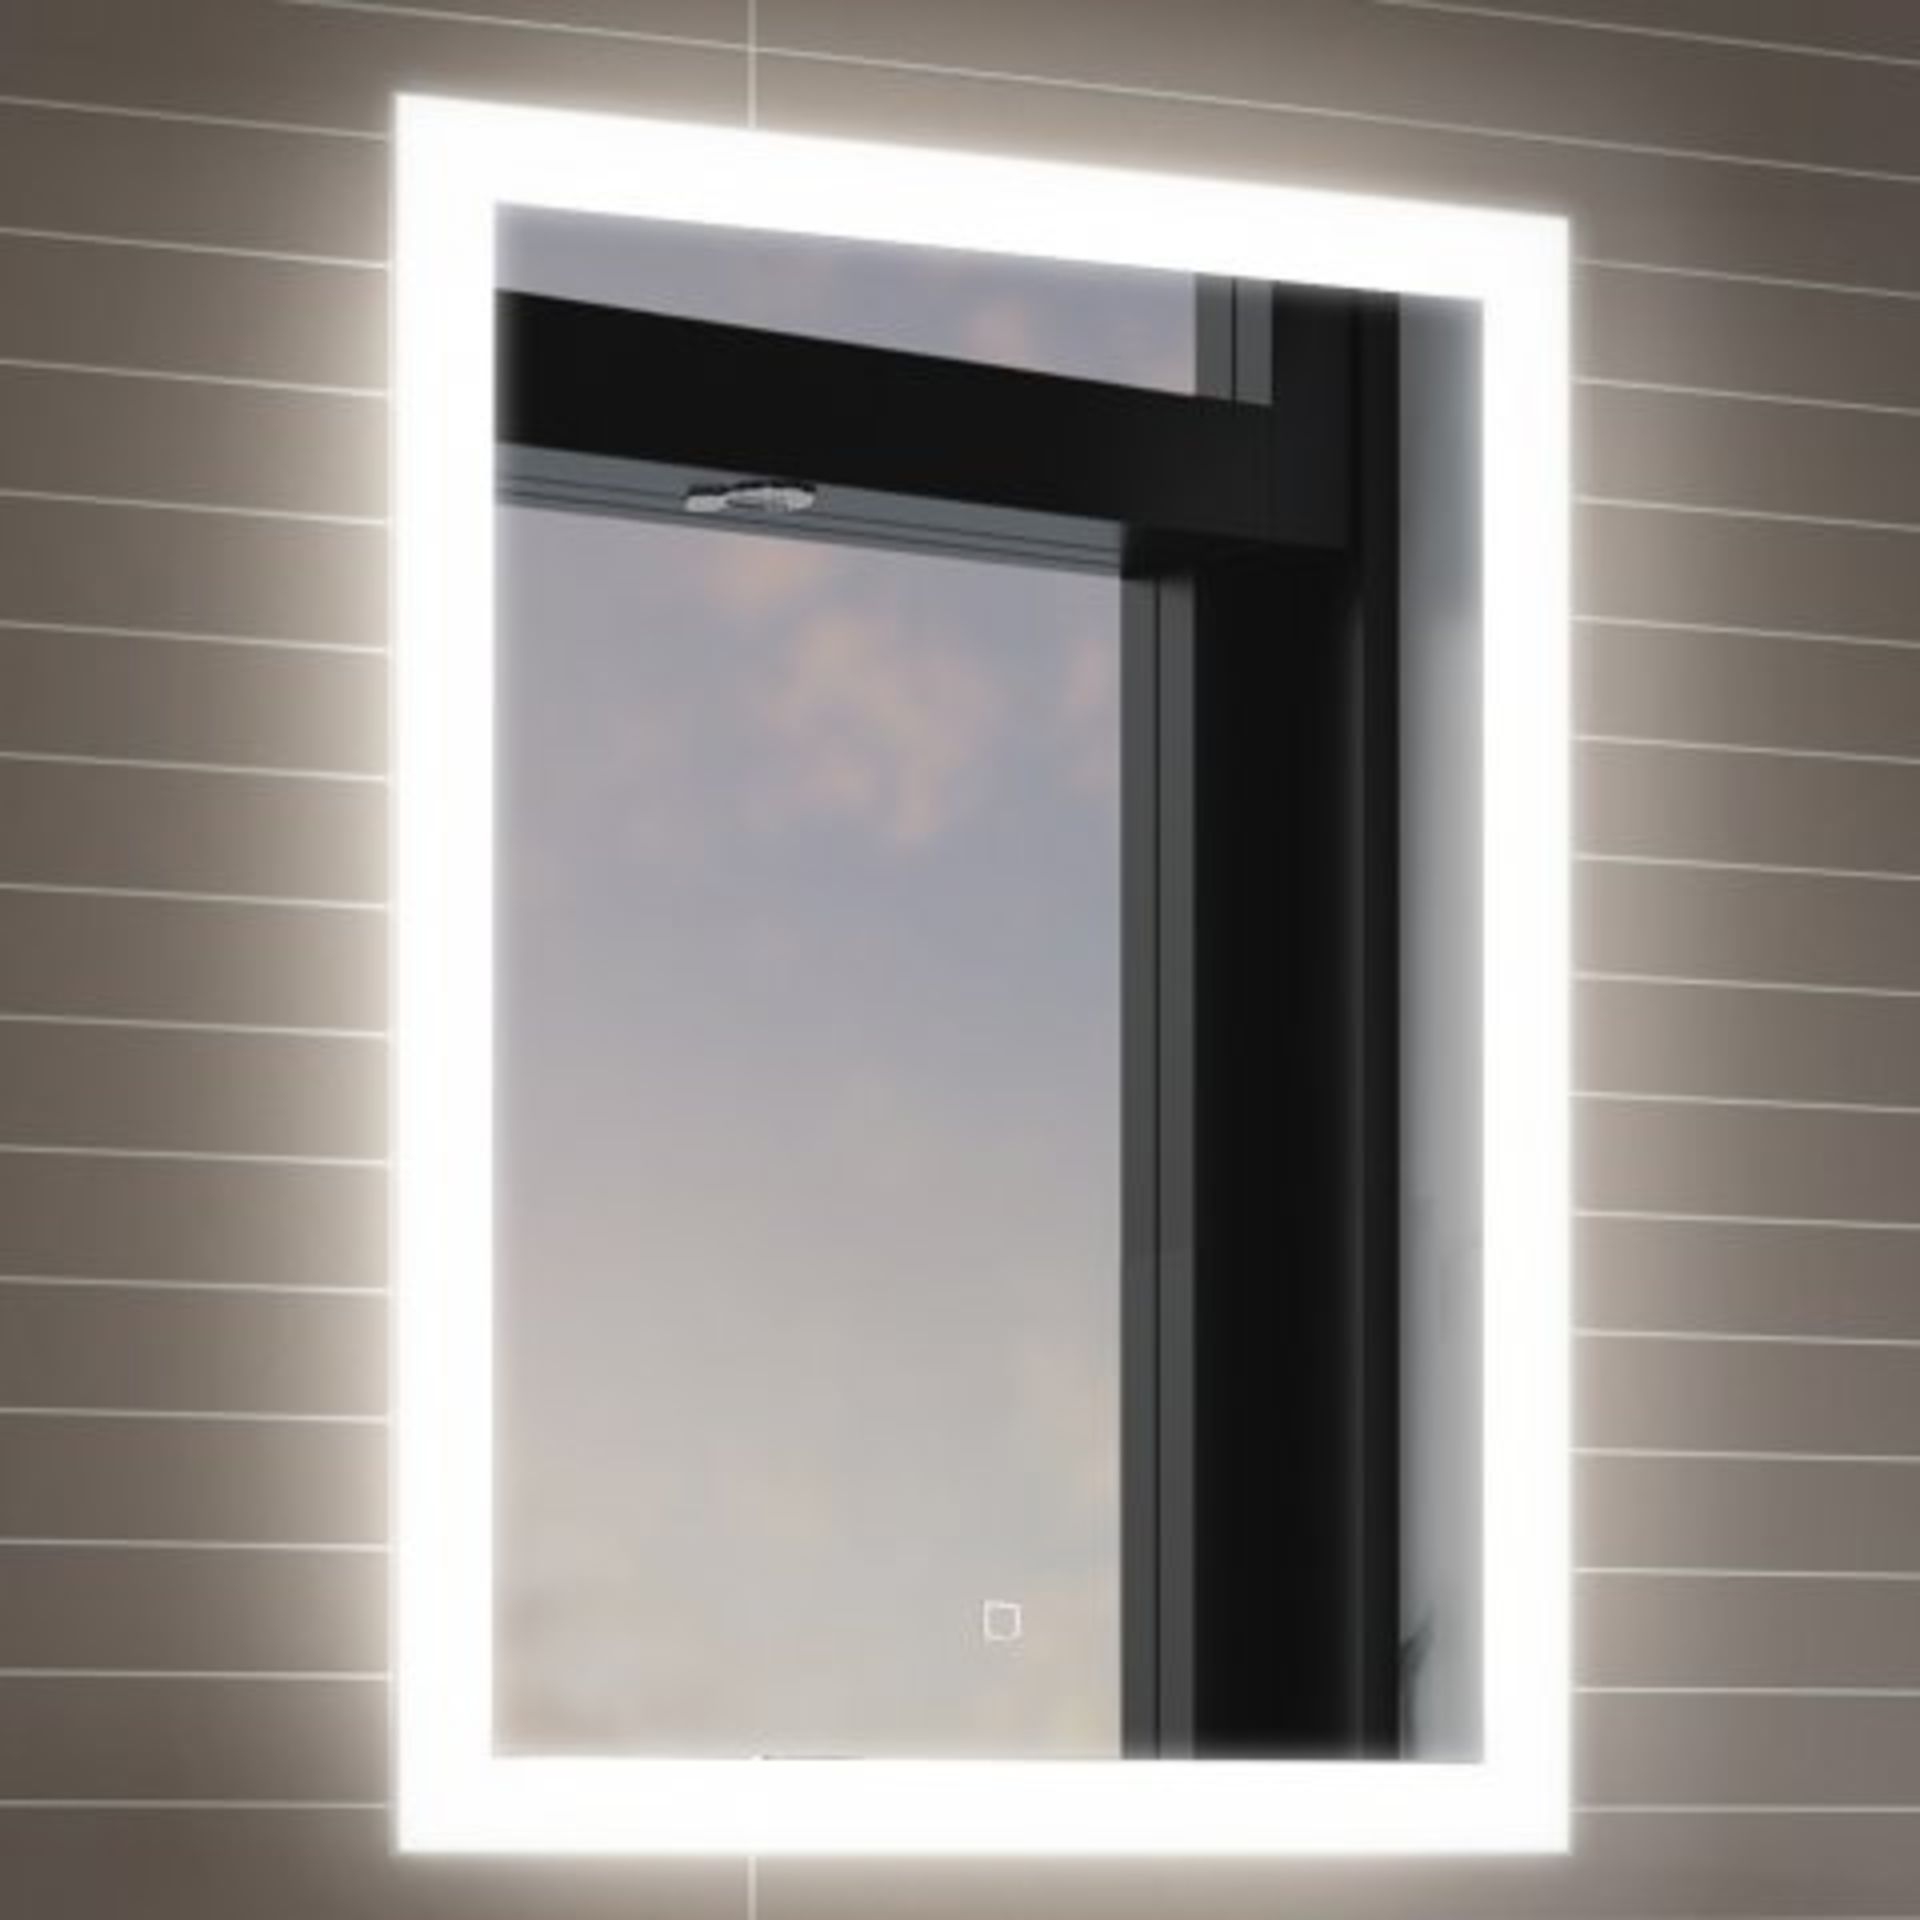 (I222) 700x500mm Orion Illuminated LED Mirror - Switch Control. RRP £349.99. Light up your